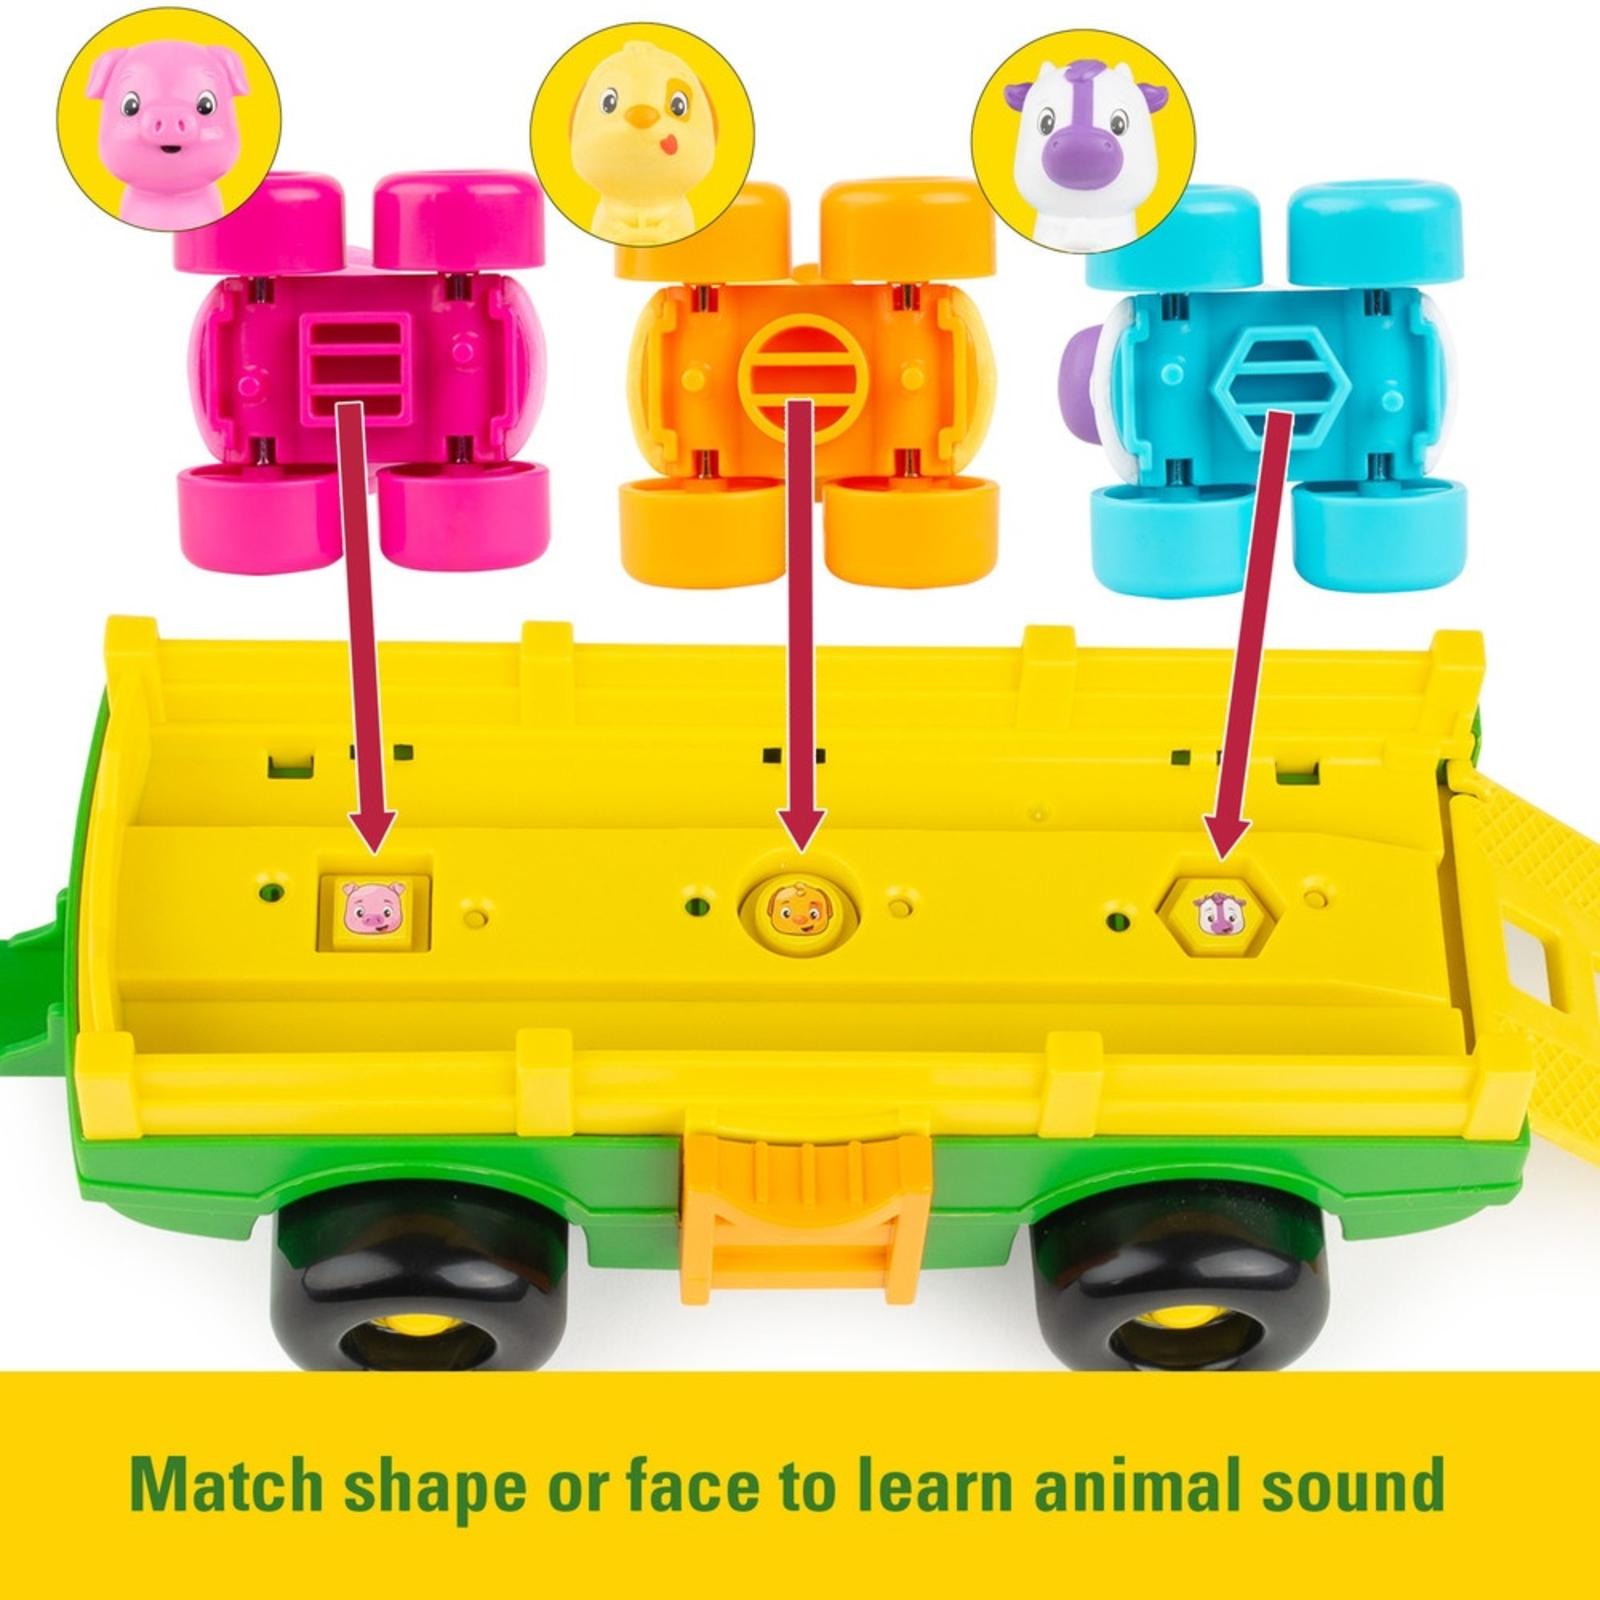 match shape or face to learn animal sounds